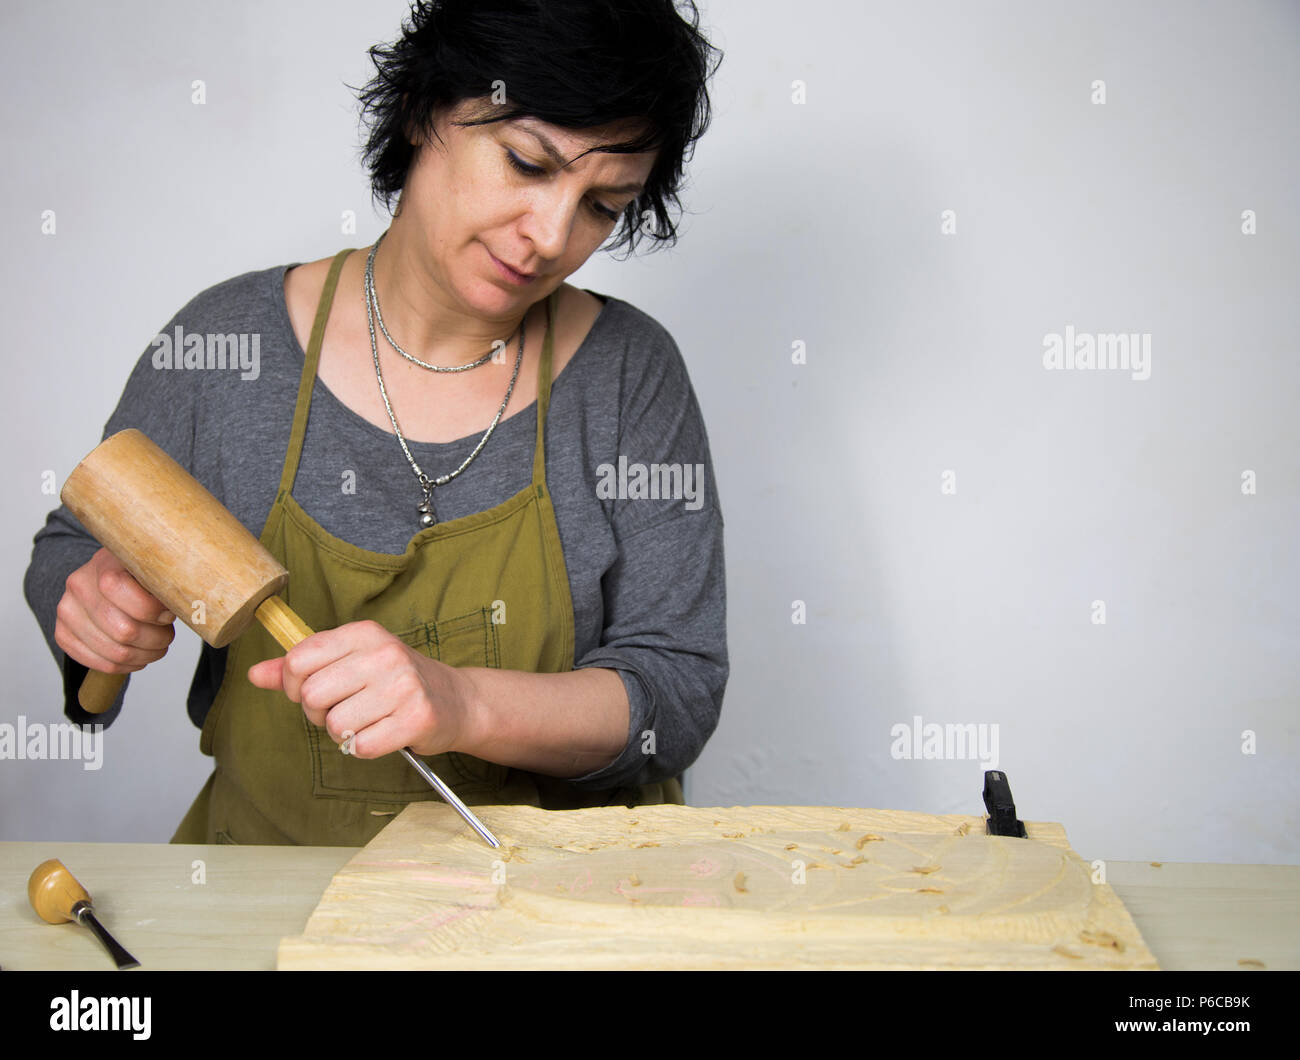 Work Of Woman Artist. Woman sculptor of carver carving wood. Stock Photo